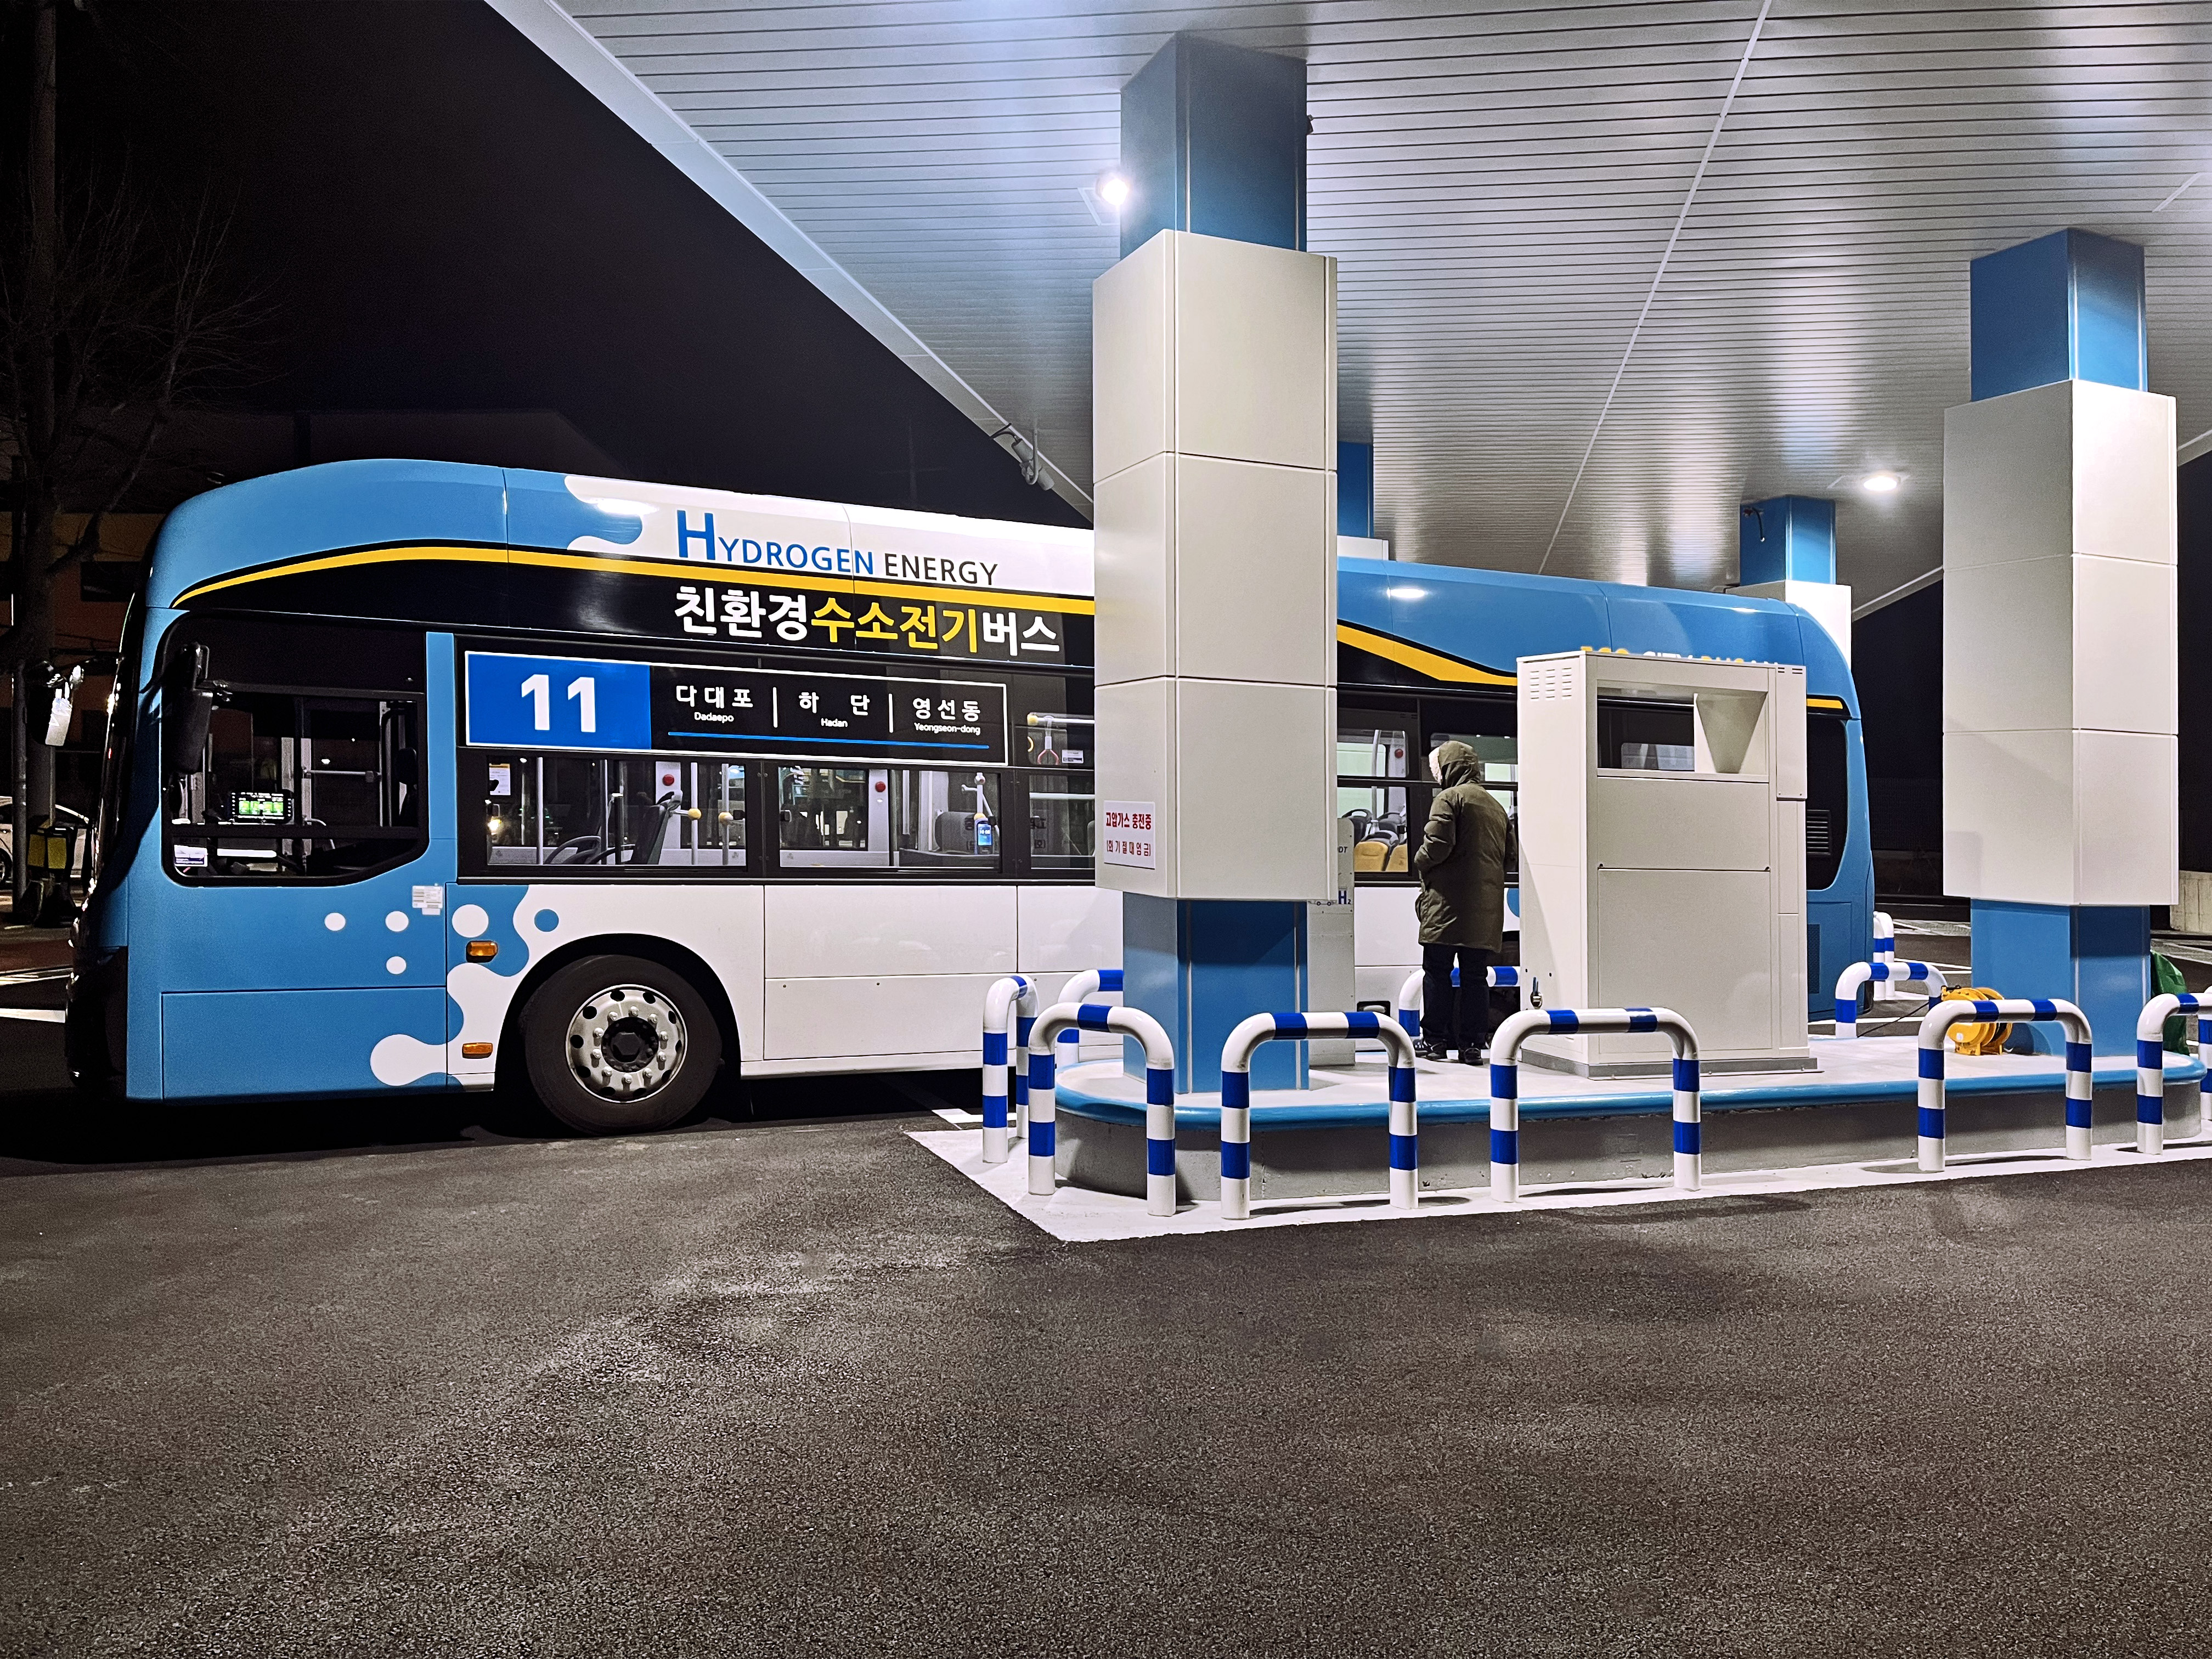 Hydrogen bus at refueling station in South Korea